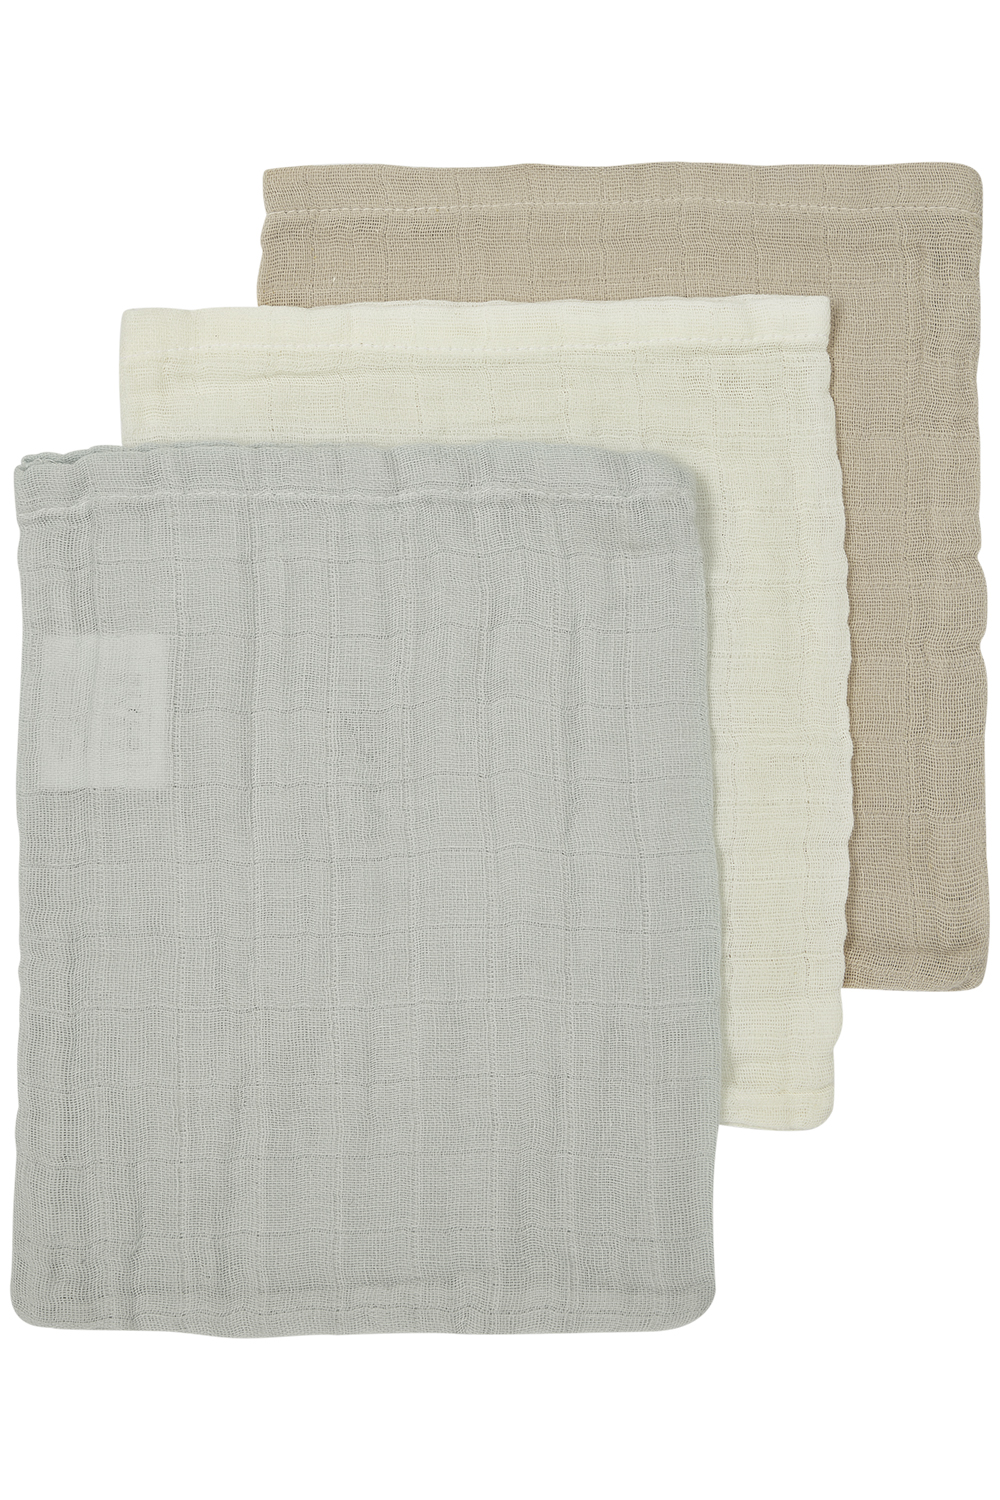 Waschhandschuhe 3er pack pre-washed musselin Uni - offwhite/light grey/sand - 20x17cm